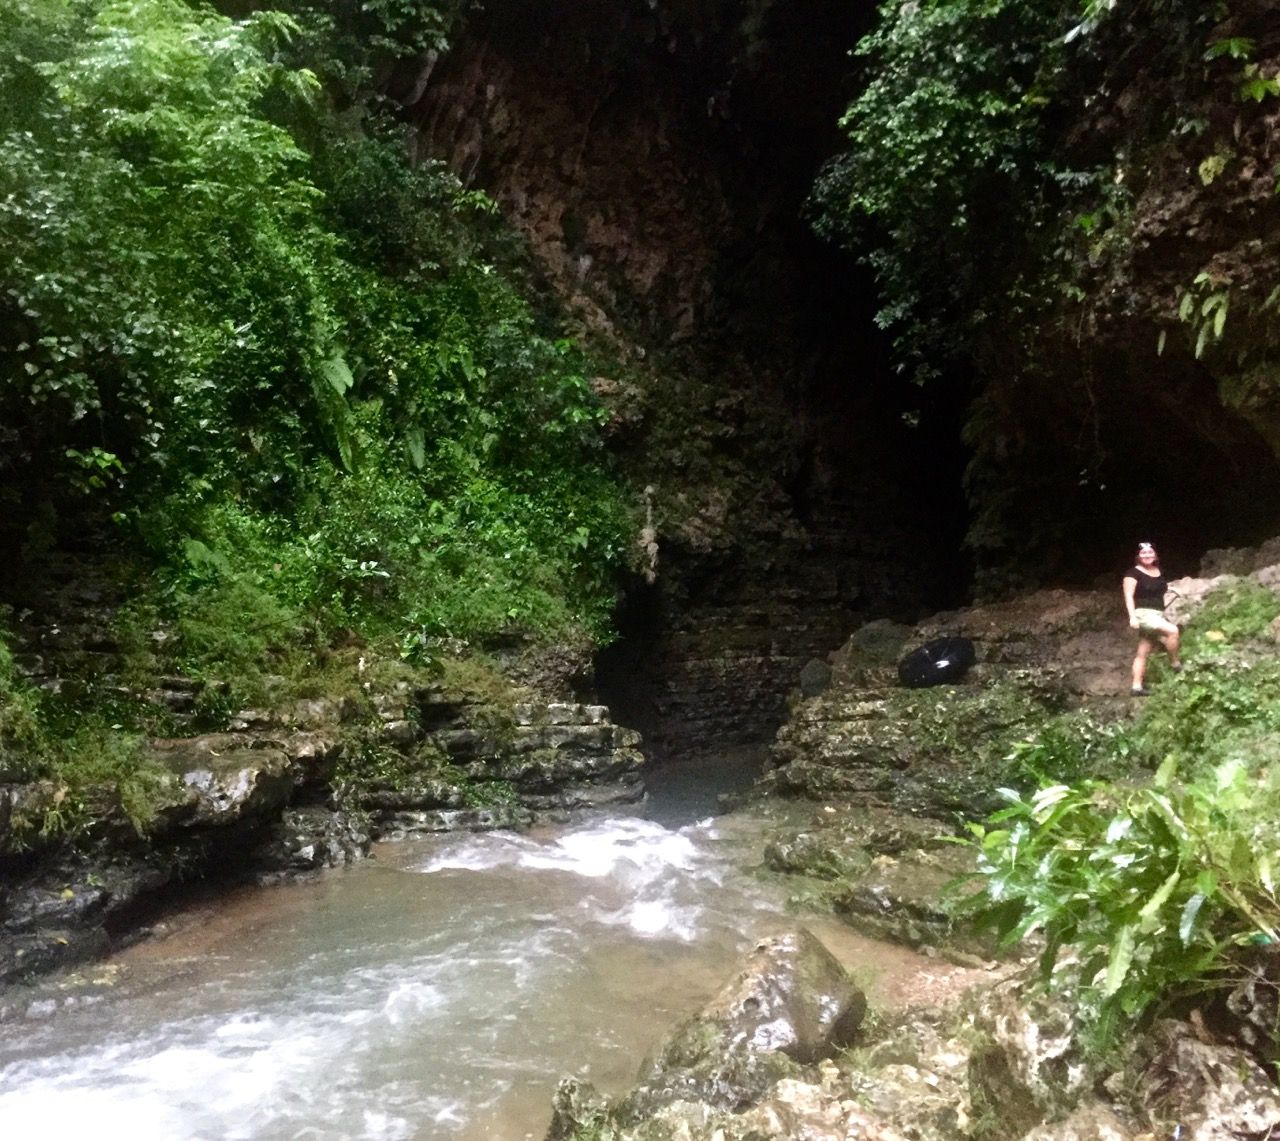 Woman posing in front of dark cave with a river flowing into it.